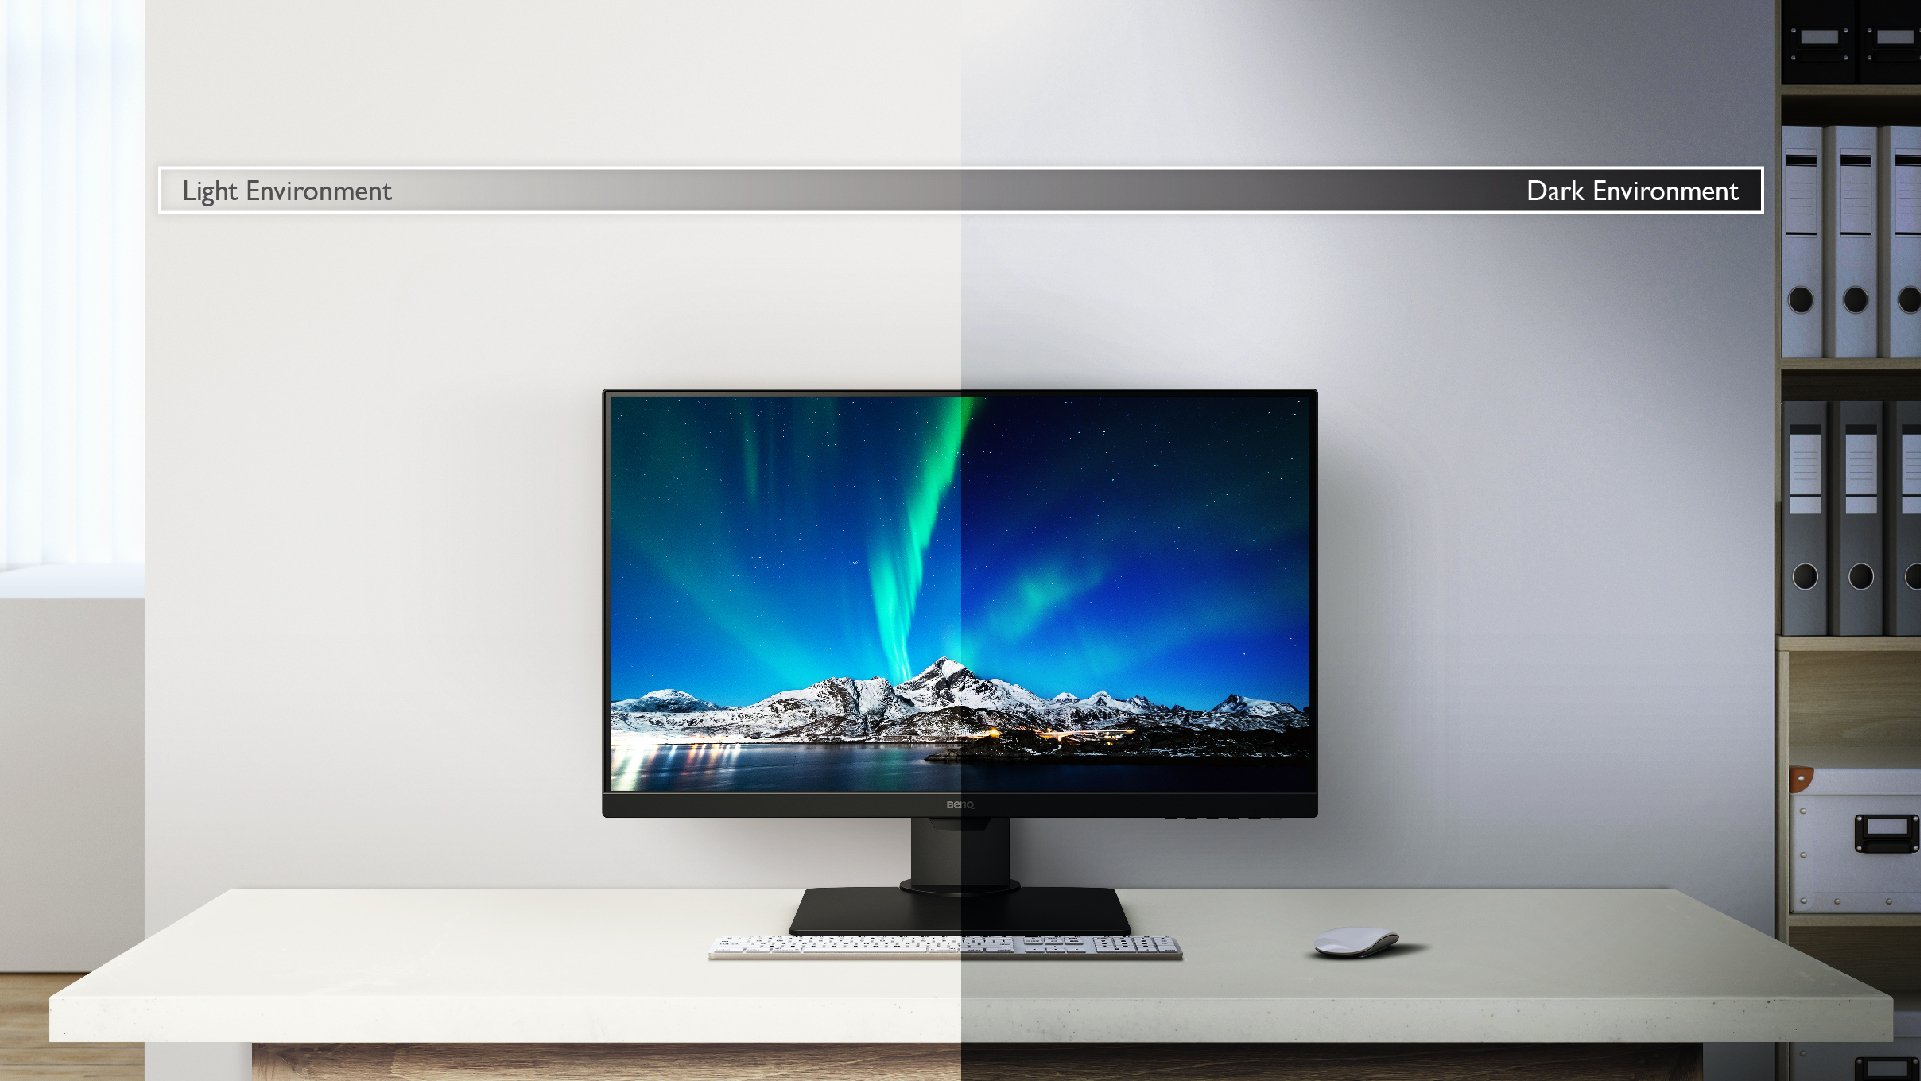 BenQ BL2780T Brightness Intelligence actively adjusts screen brightness for comfortable viewing experiences.